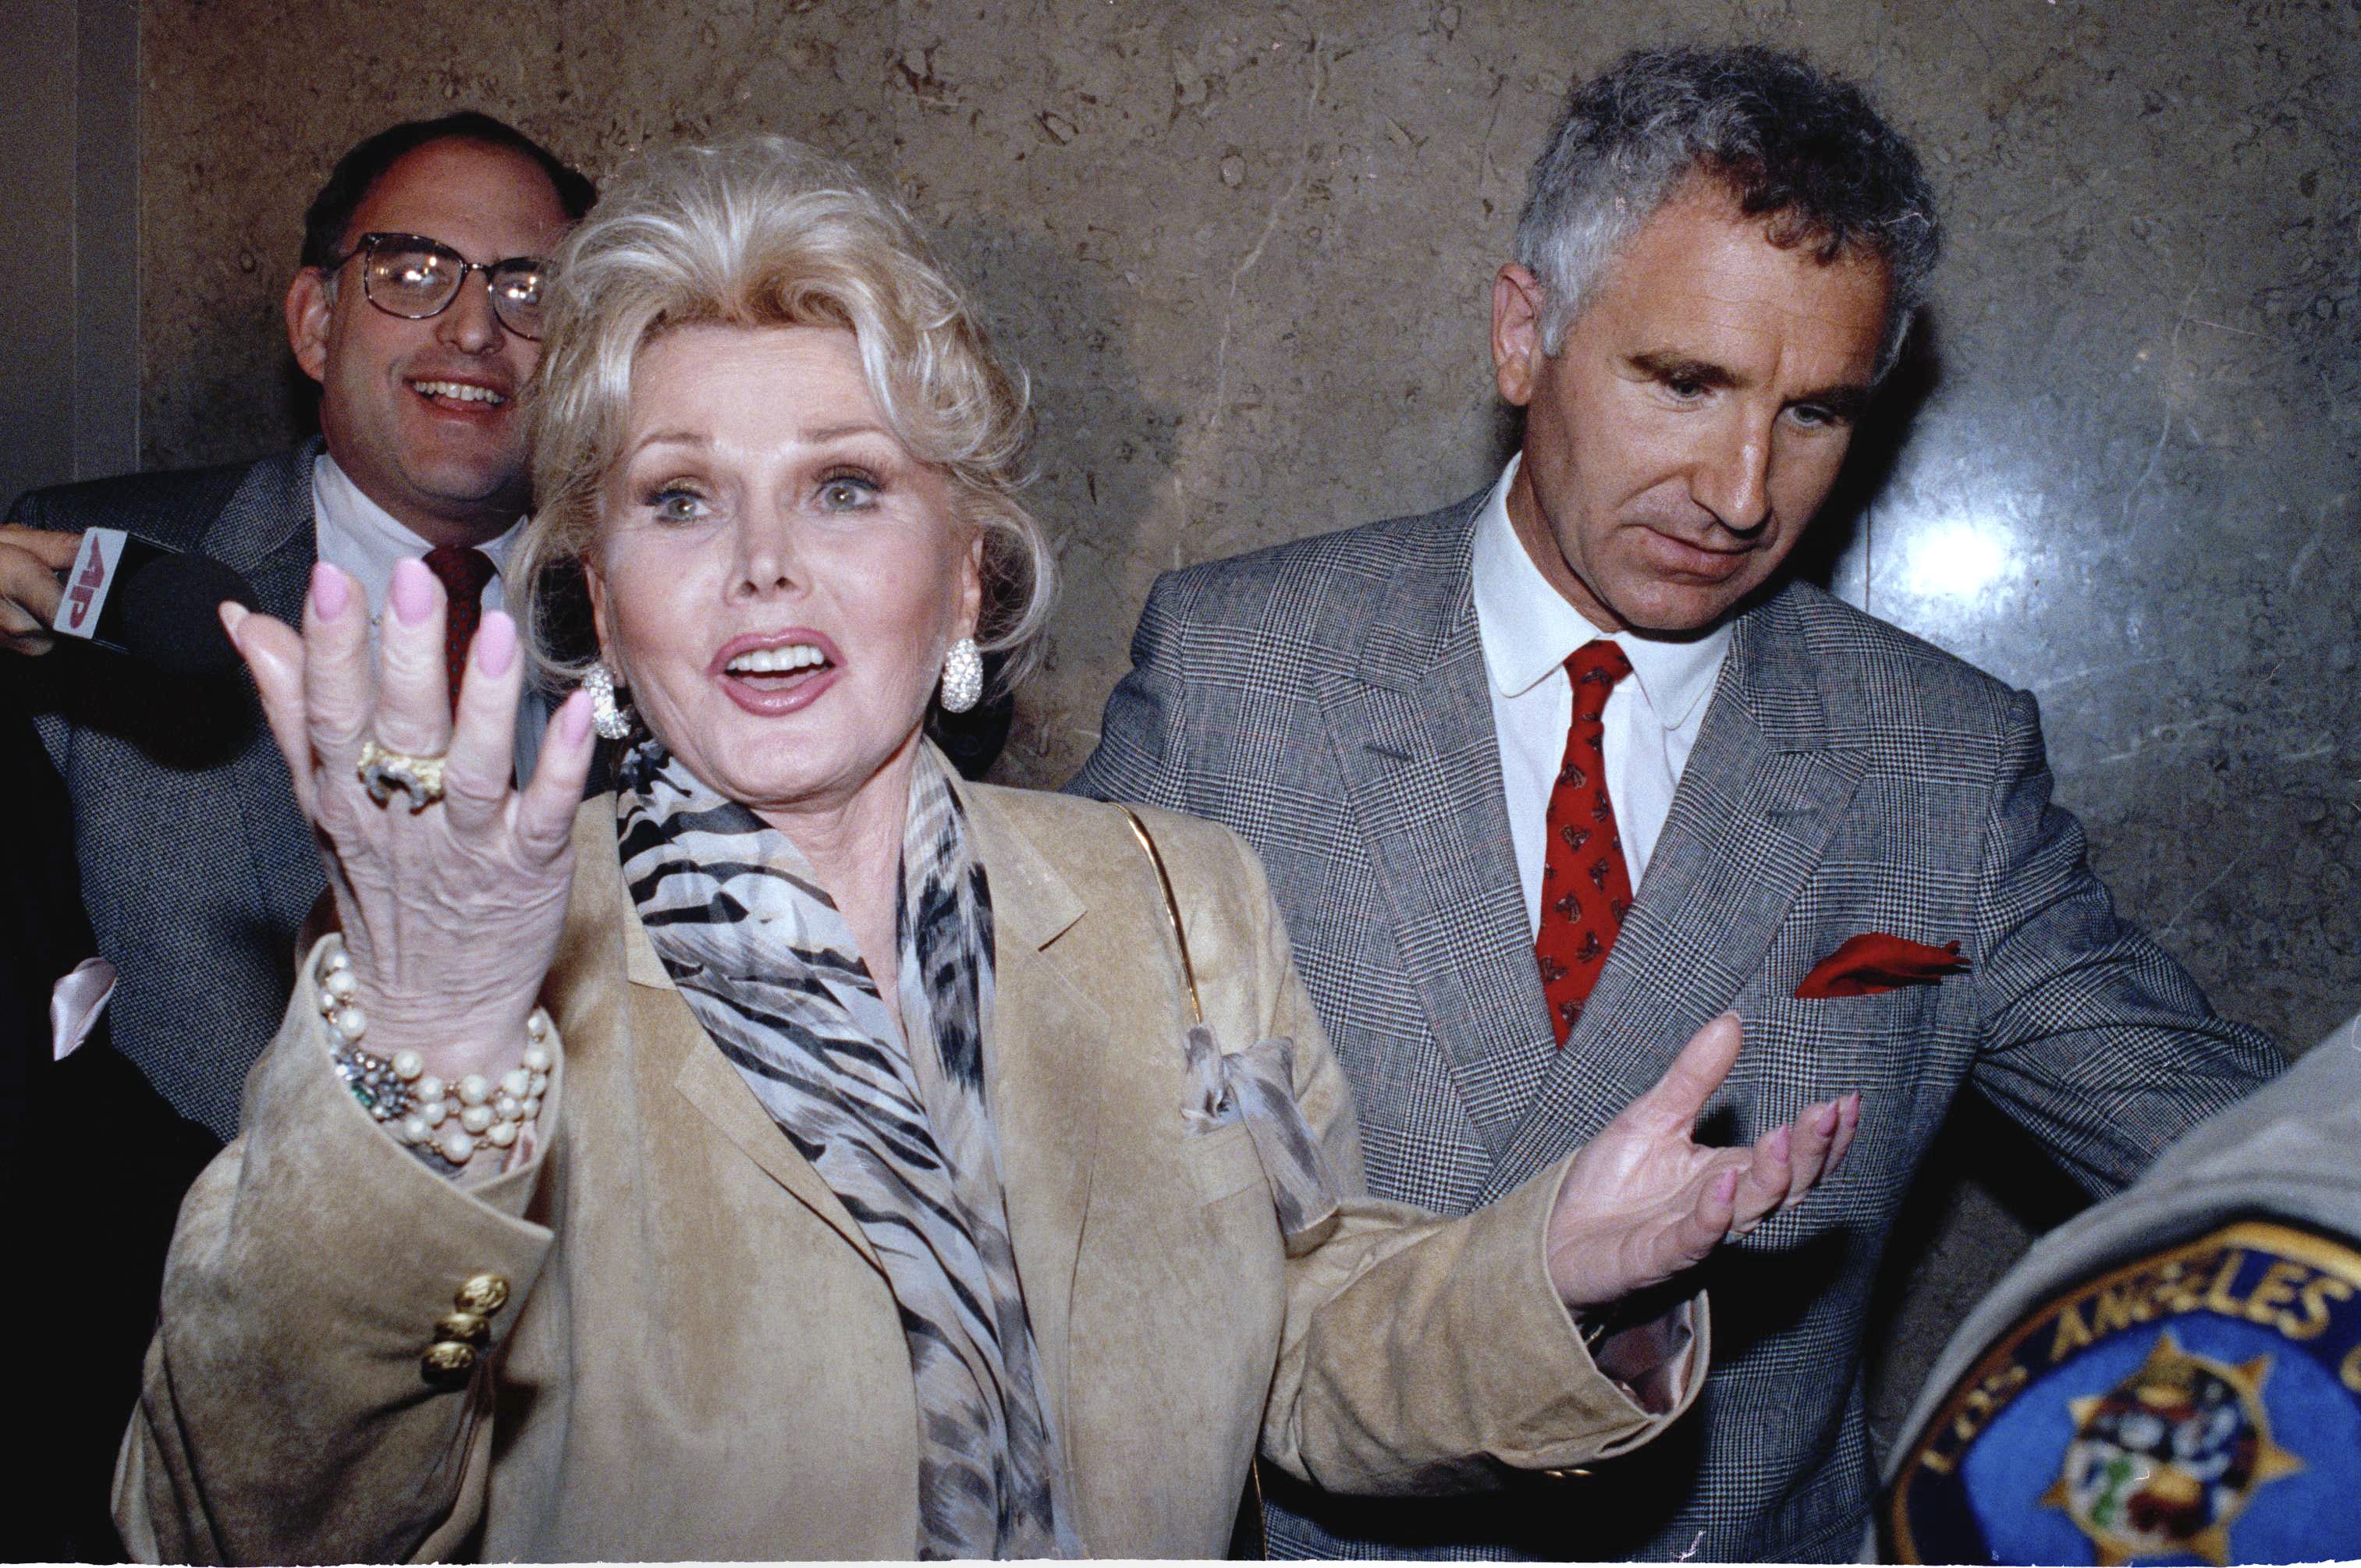 In a May 1, 1990 file photo, Zsa Zsa Gabor gestures as she while answering questions as she leaves the Beverly Hills courtroom where judge Charles Rubin ruled that she violated her probation. Gabor was ordered to complete her community service at a Venice homeless shelter, with an additional 60 hours. At right is her husband Frederick von Anhalt. Gabor died Sunday, Dec. 18, 2016, of a heart attack at her Bel-Air home, her husband, Prince Frederic von Anhalt, said.